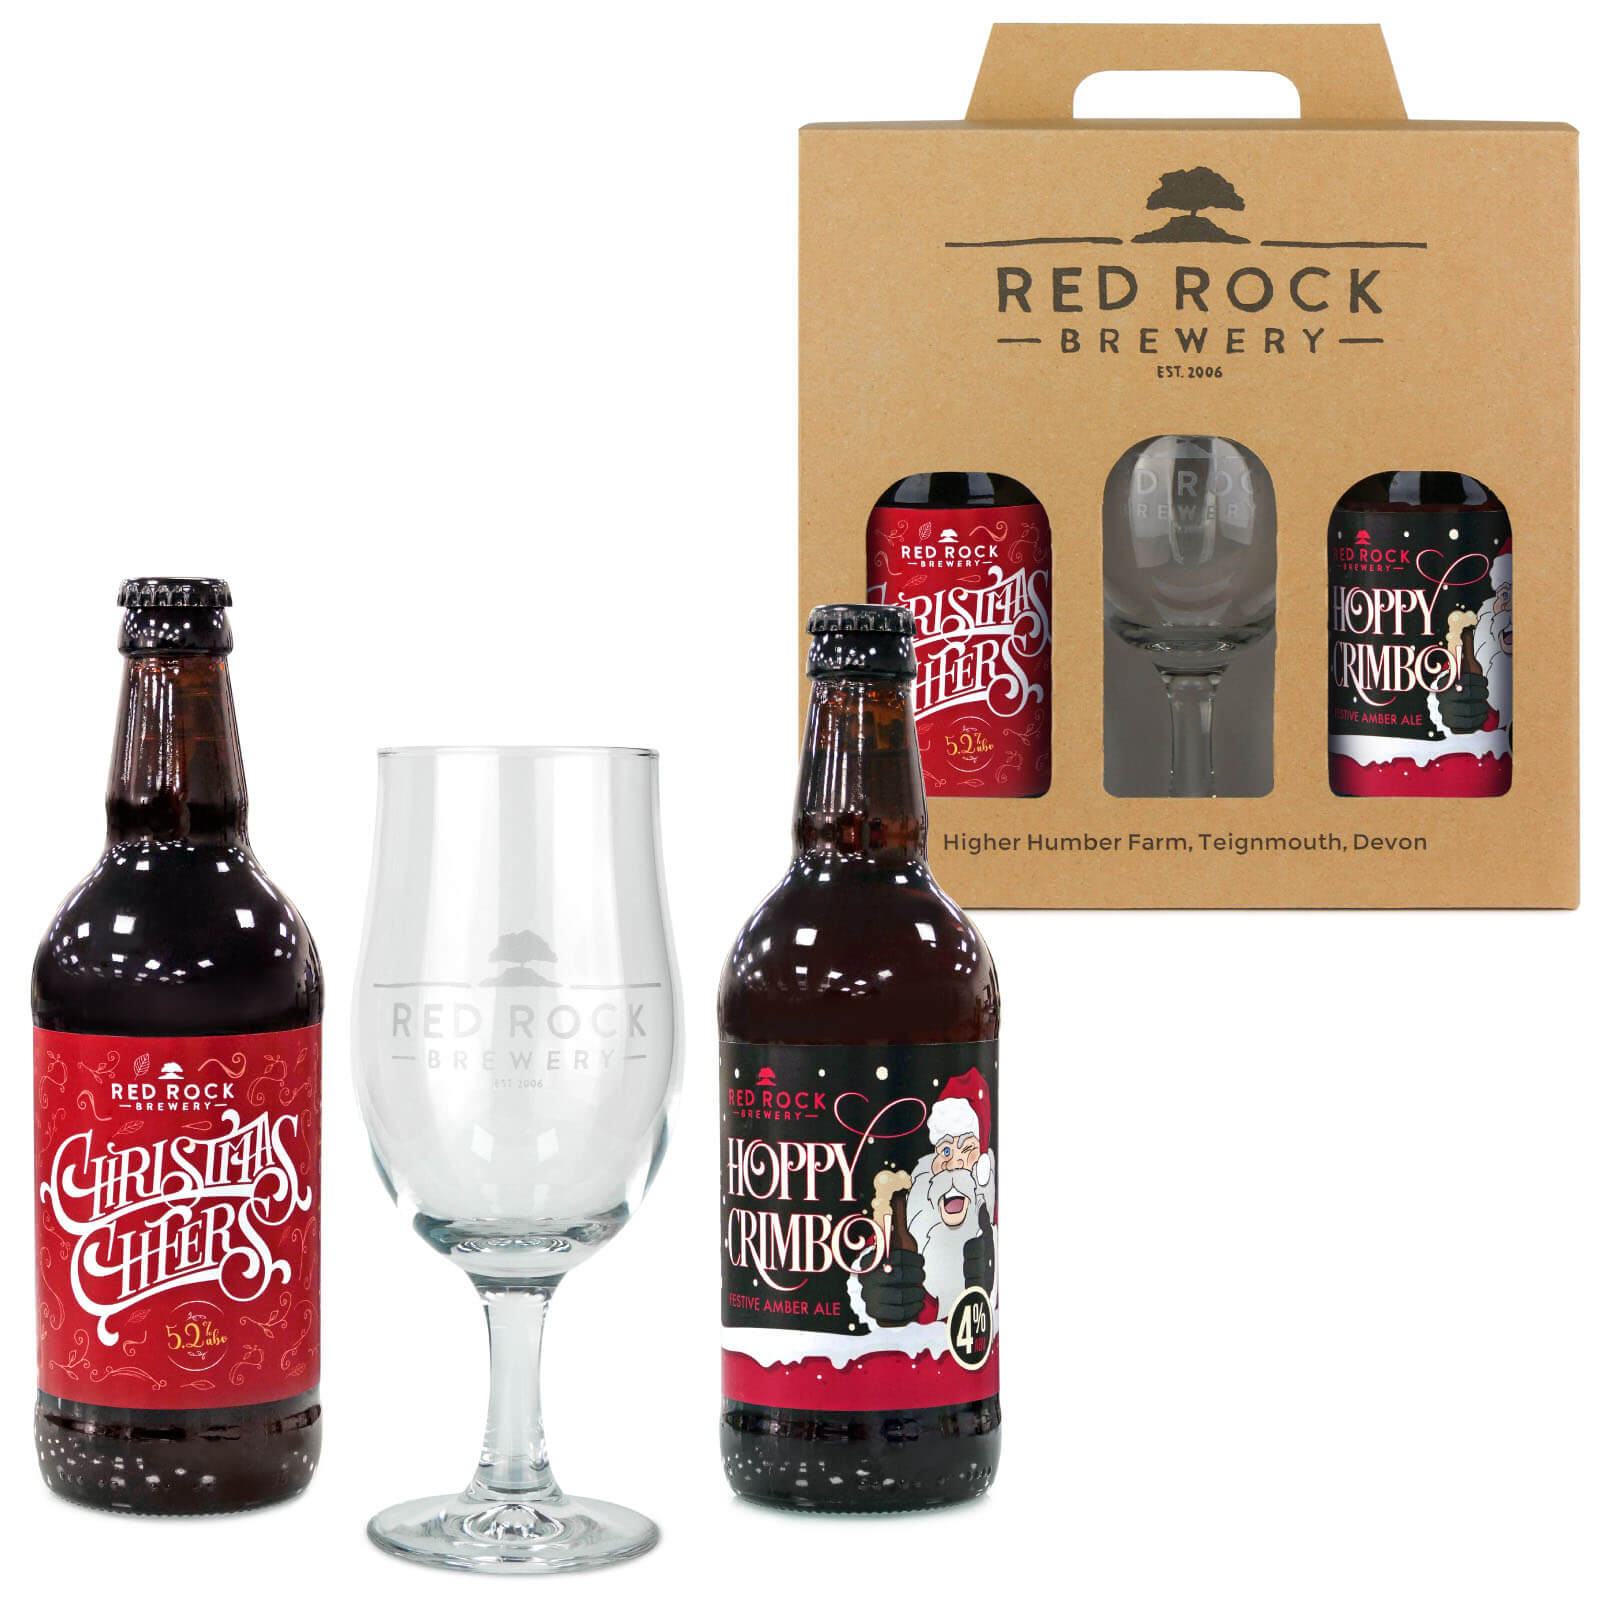 Red Rock Brewery